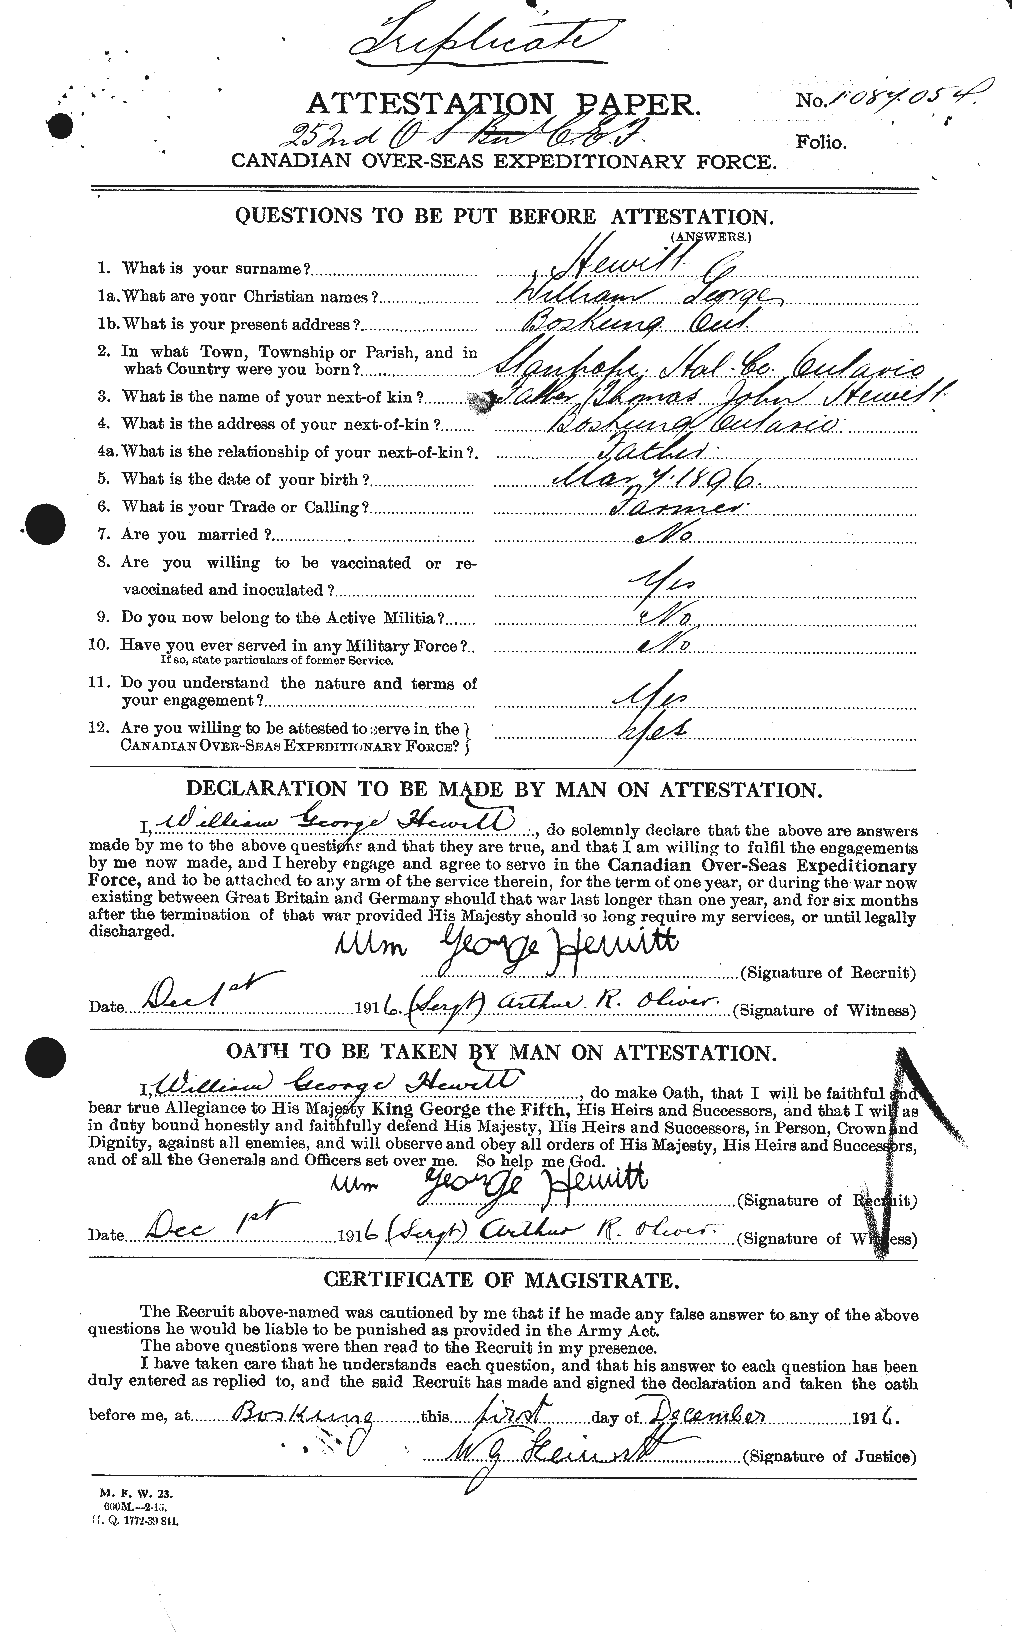 Personnel Records of the First World War - CEF 392267a